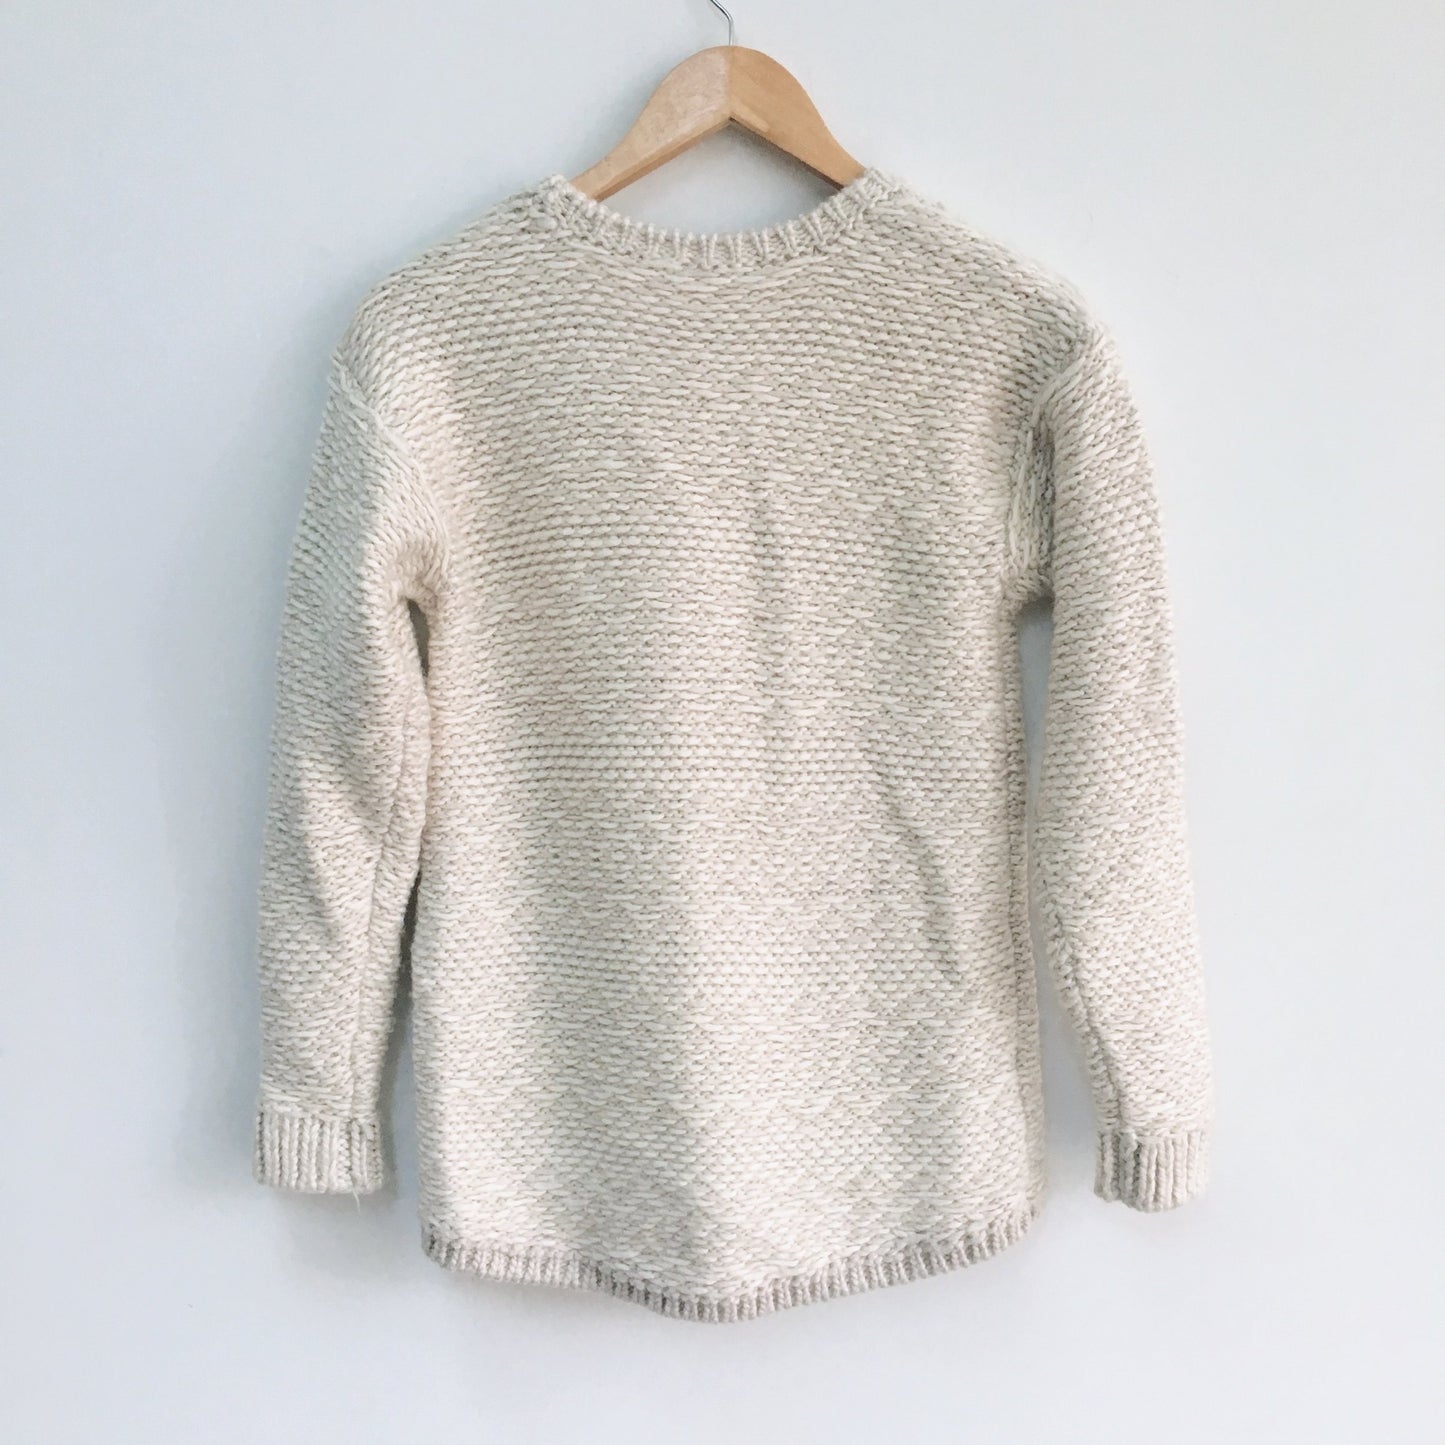 Inside Out Knit Sweater - Size Small